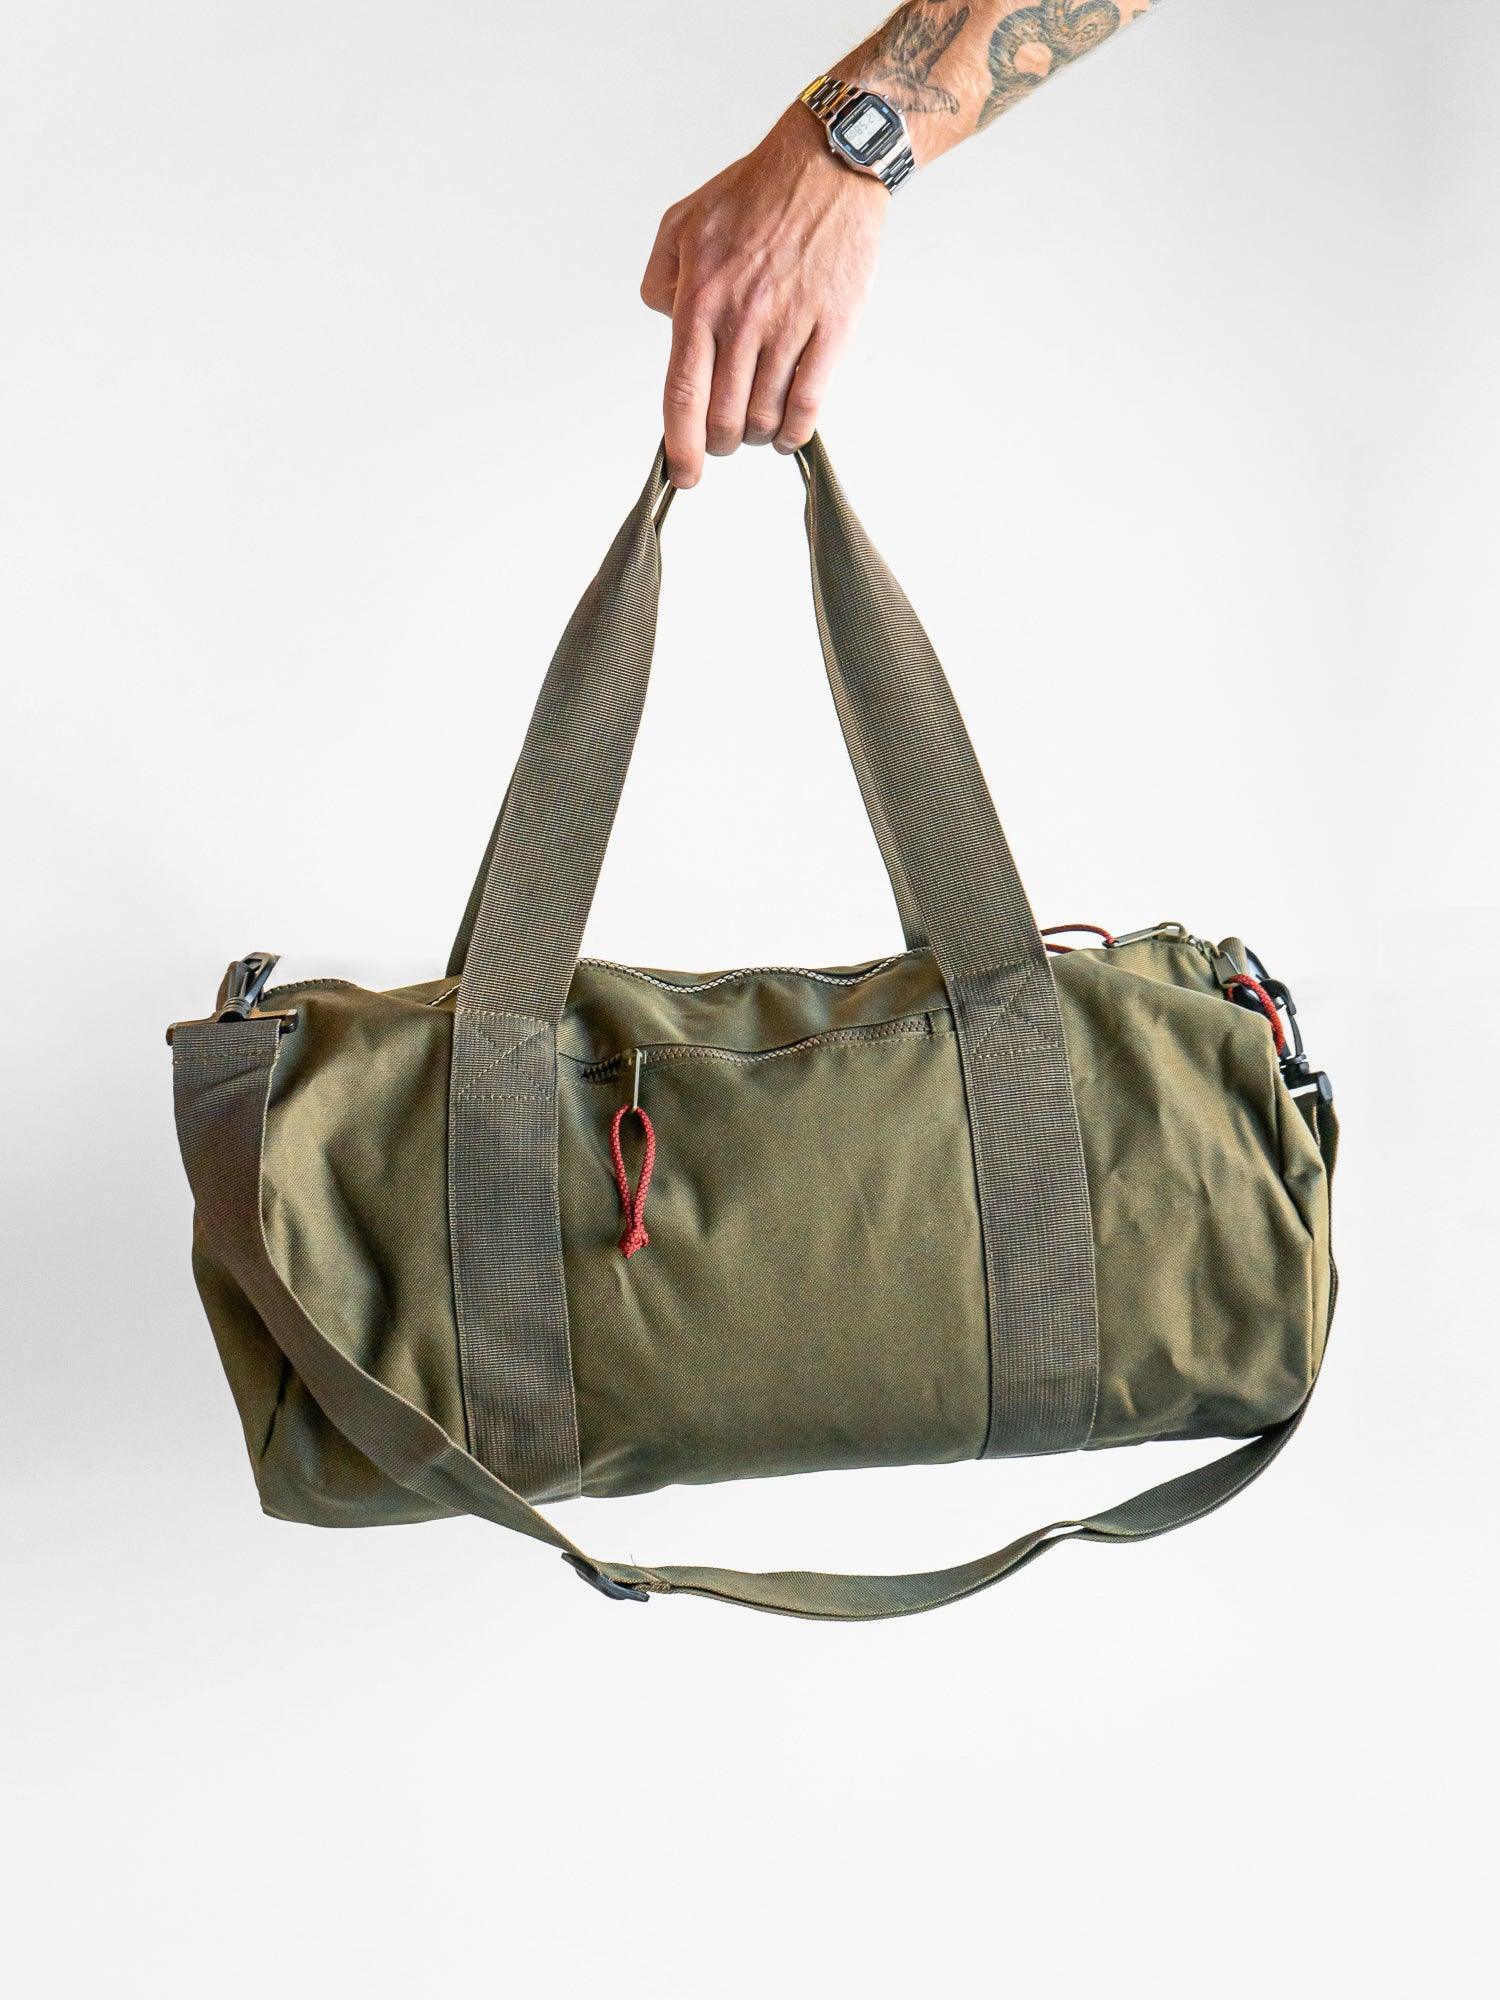 Union Duffle Bag - Watershed Brand